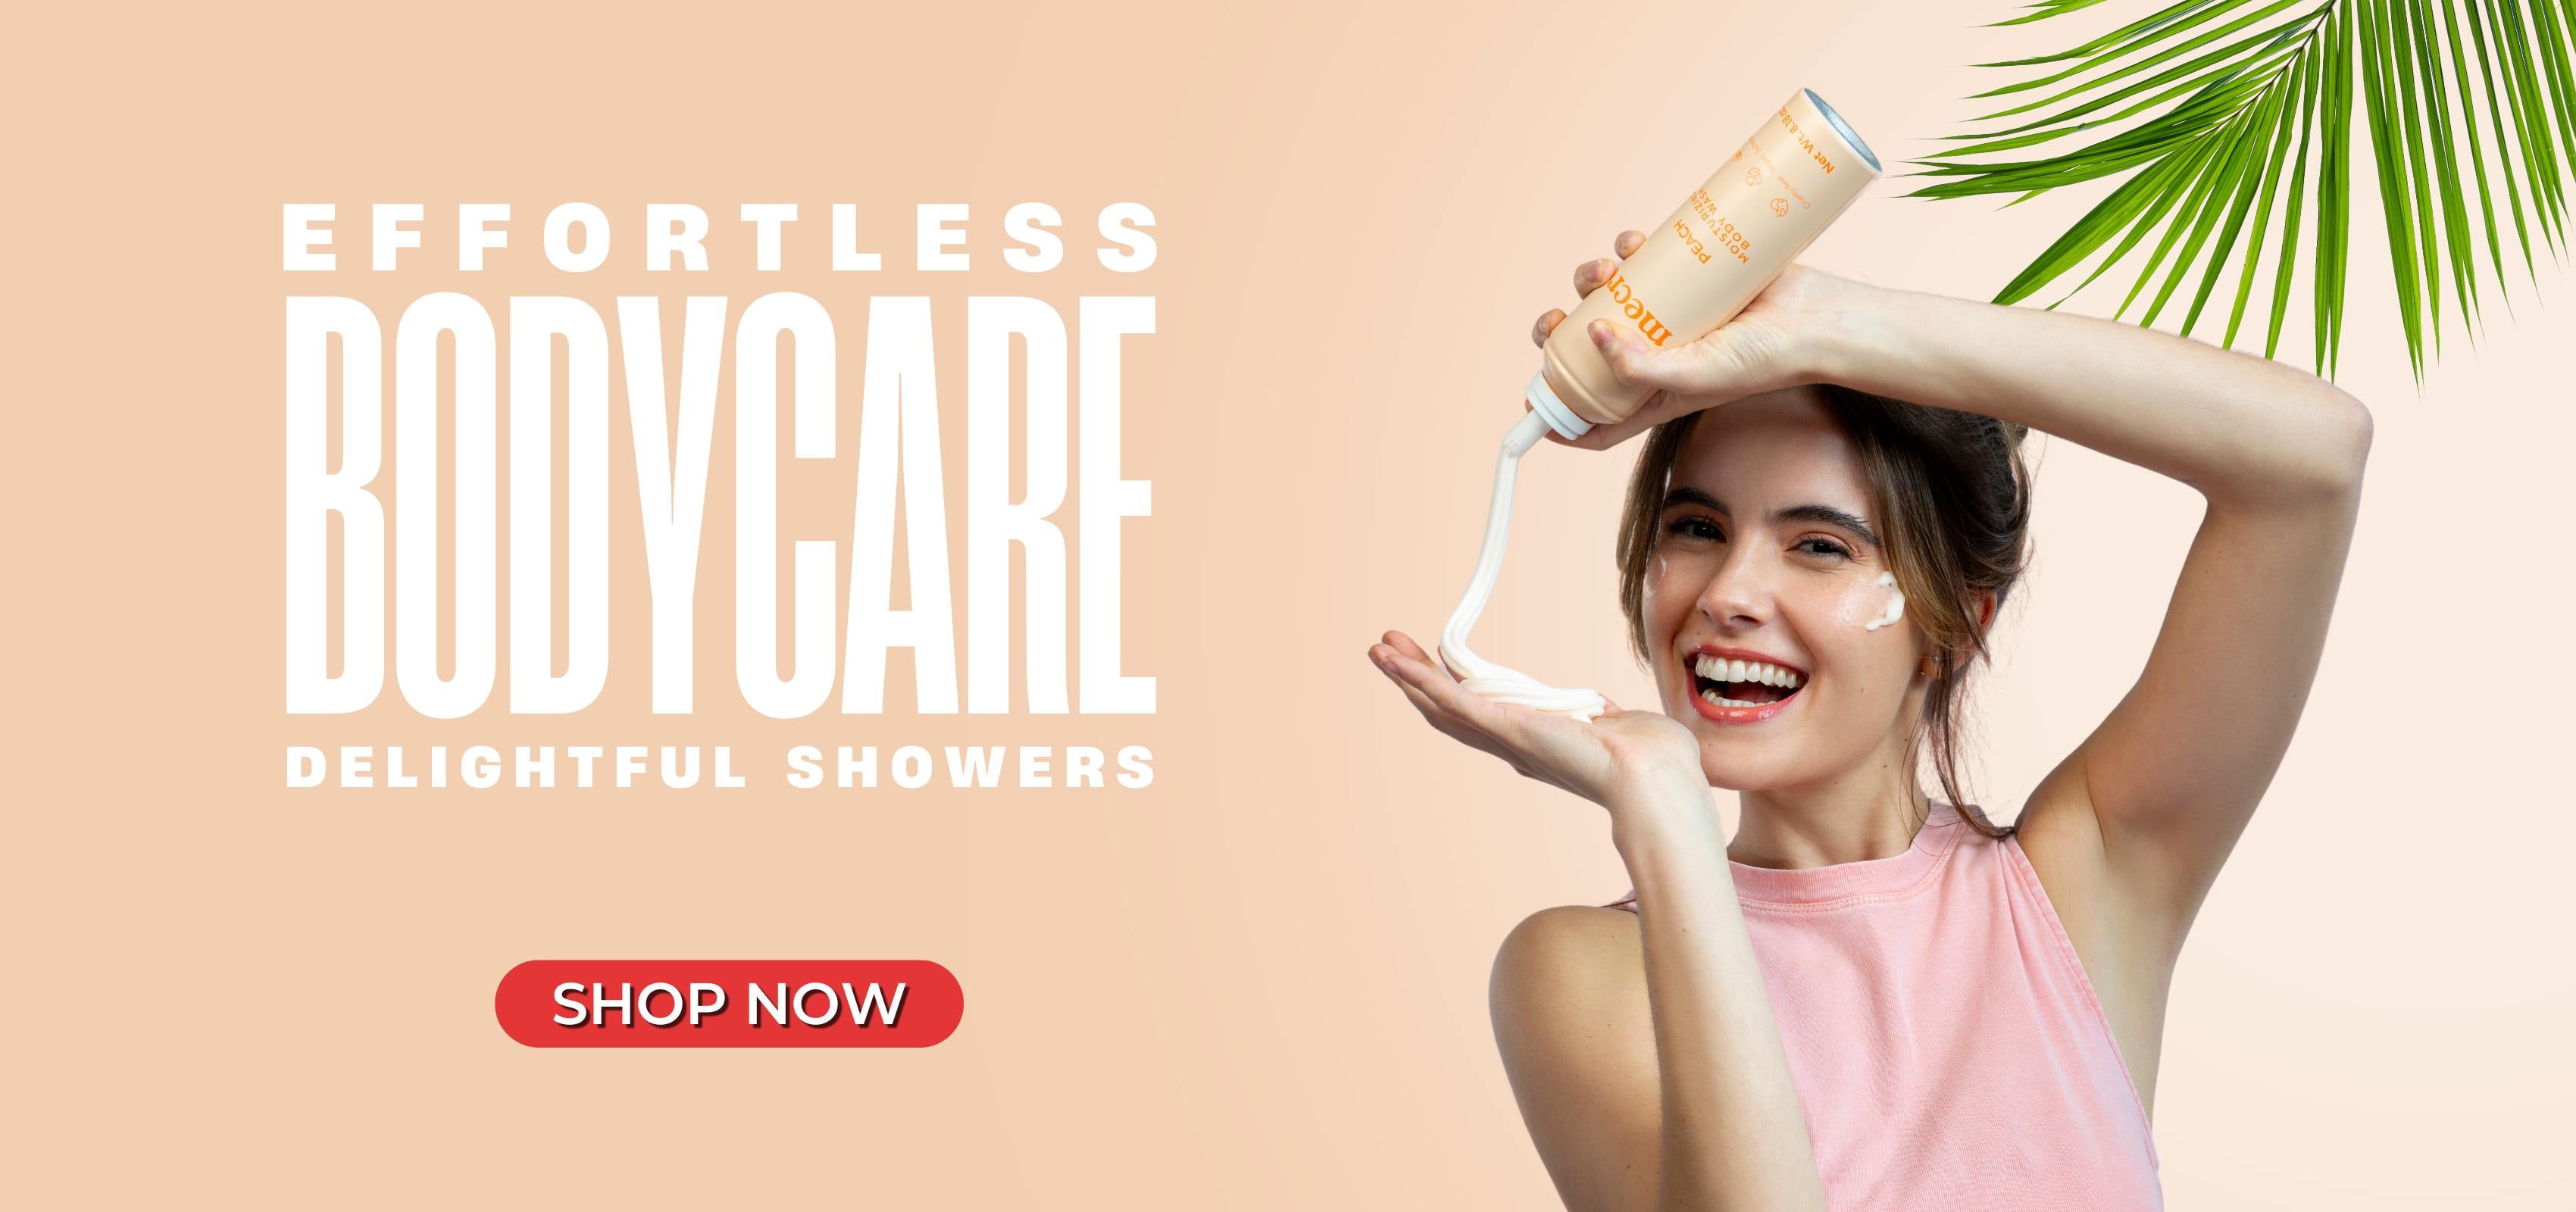 Banner reads: "Effortless bodycare, delightful showers" with an image of a girl spraying her hand while smiling.